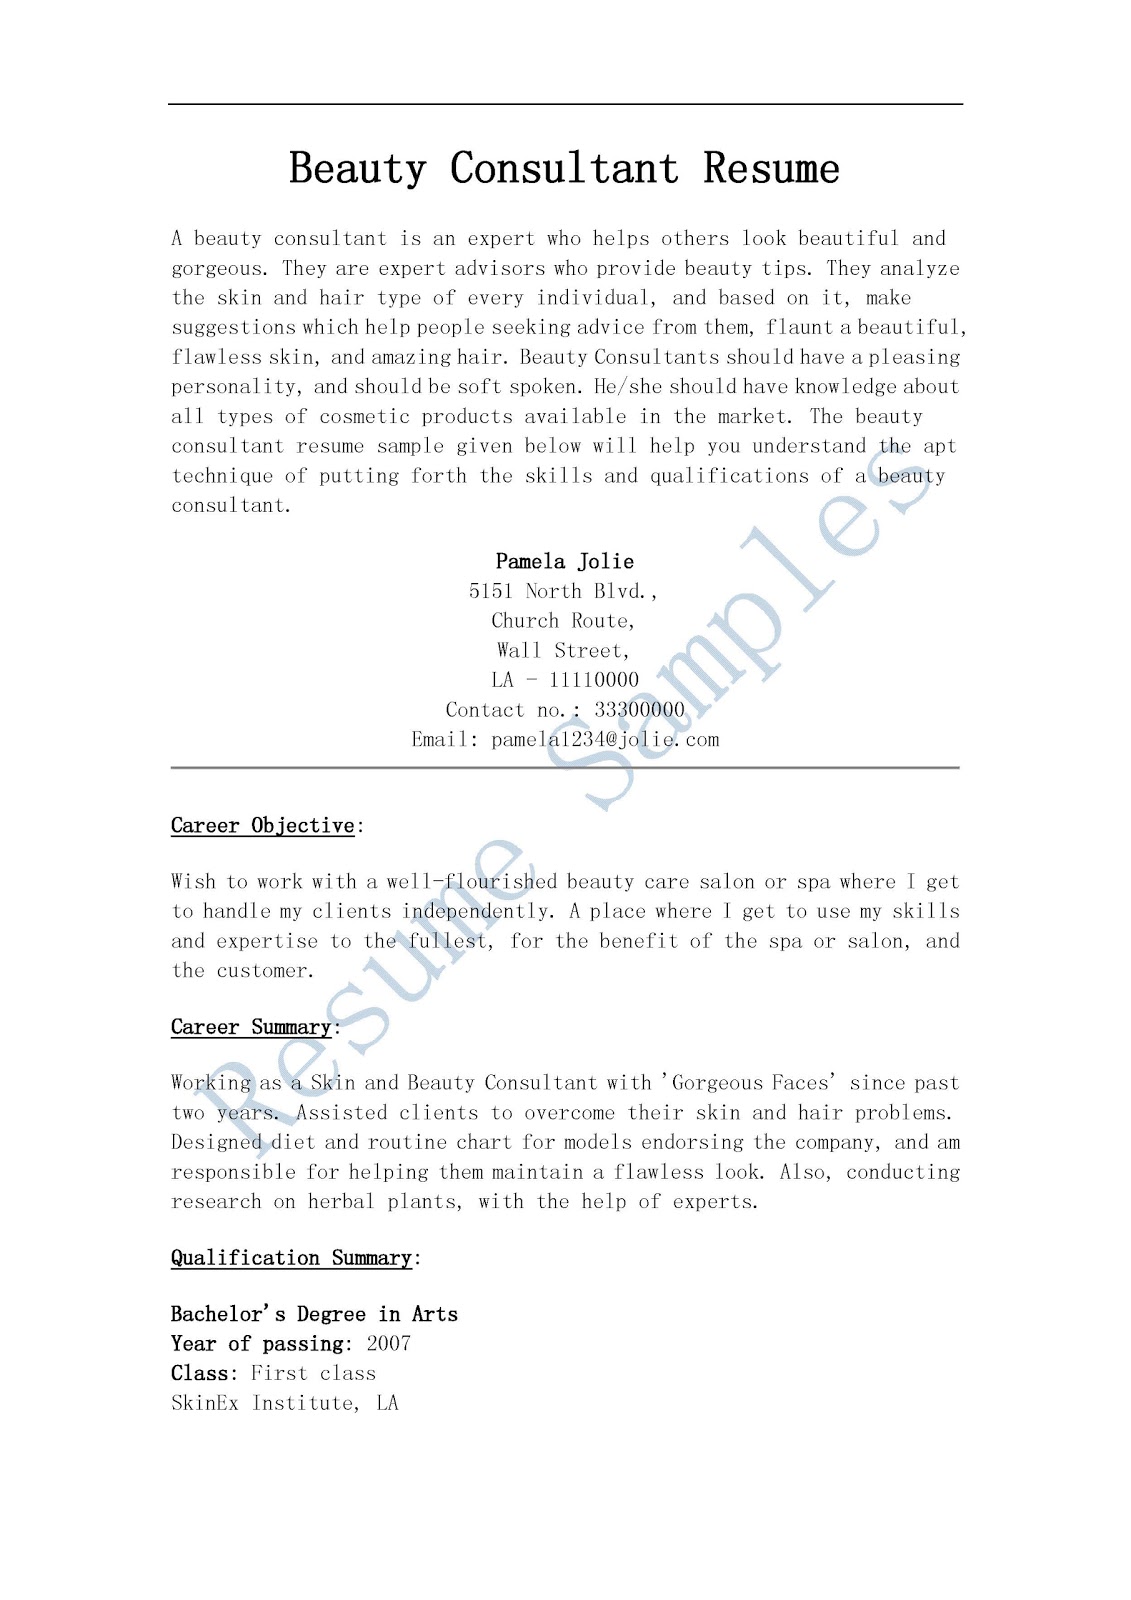 Resume Samples: Beauty Consultant Resume